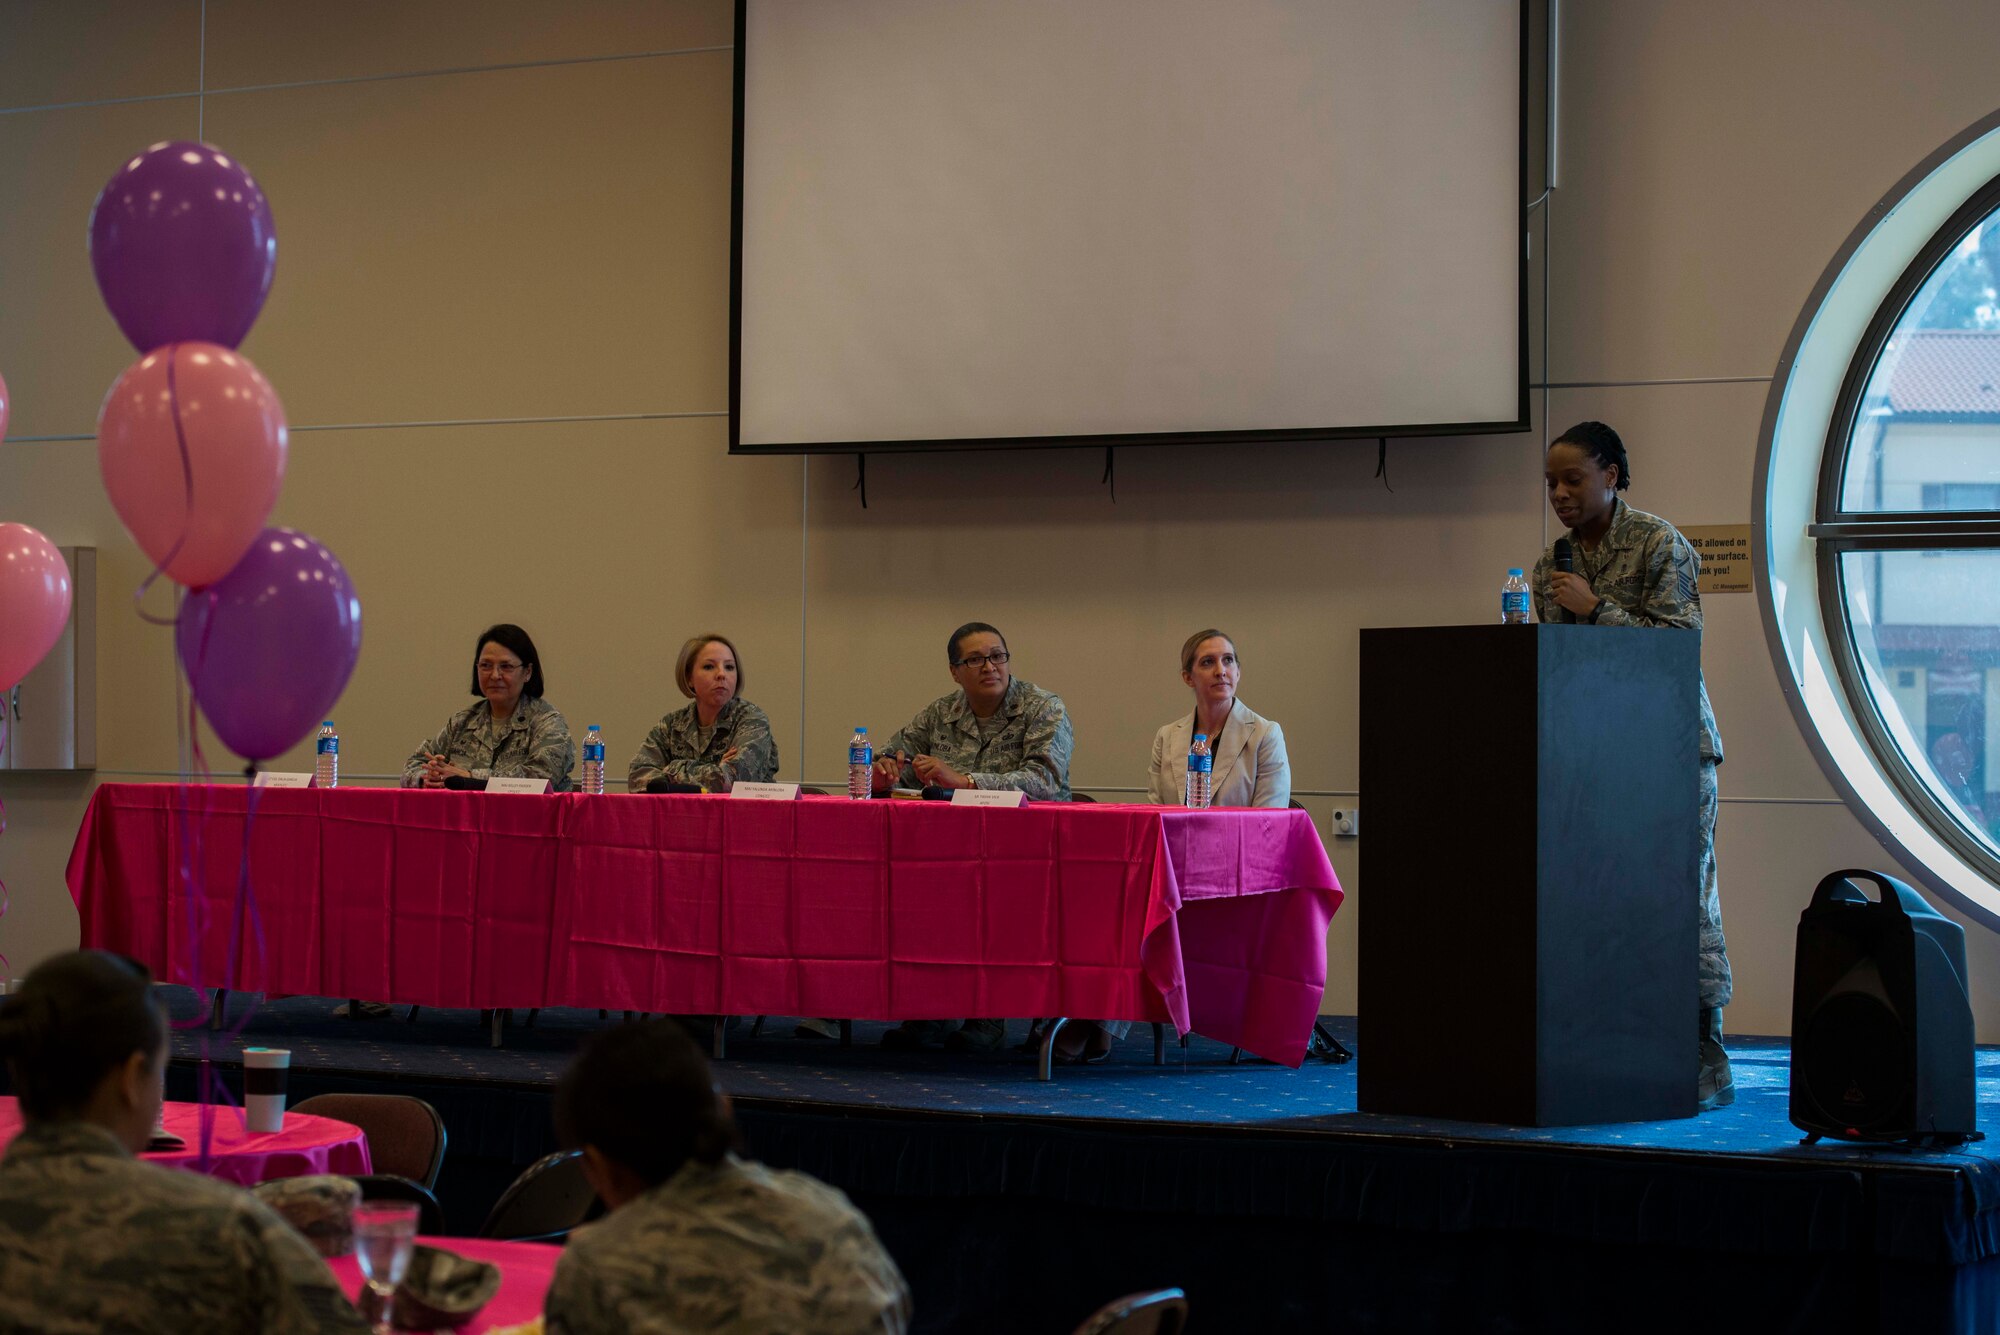 U.S. Air Force Airmen assigned to the 39th Air Base Wing speak at Incirlik’s International Women’s Day lunch and learn event March 8, 2017, at Incirlik Air Base, Turkey. The guests spoke about their leadership experiences in the Air Force. (U.S. Air Force photo by Airman 1st Class Devin M. Rumbaugh)